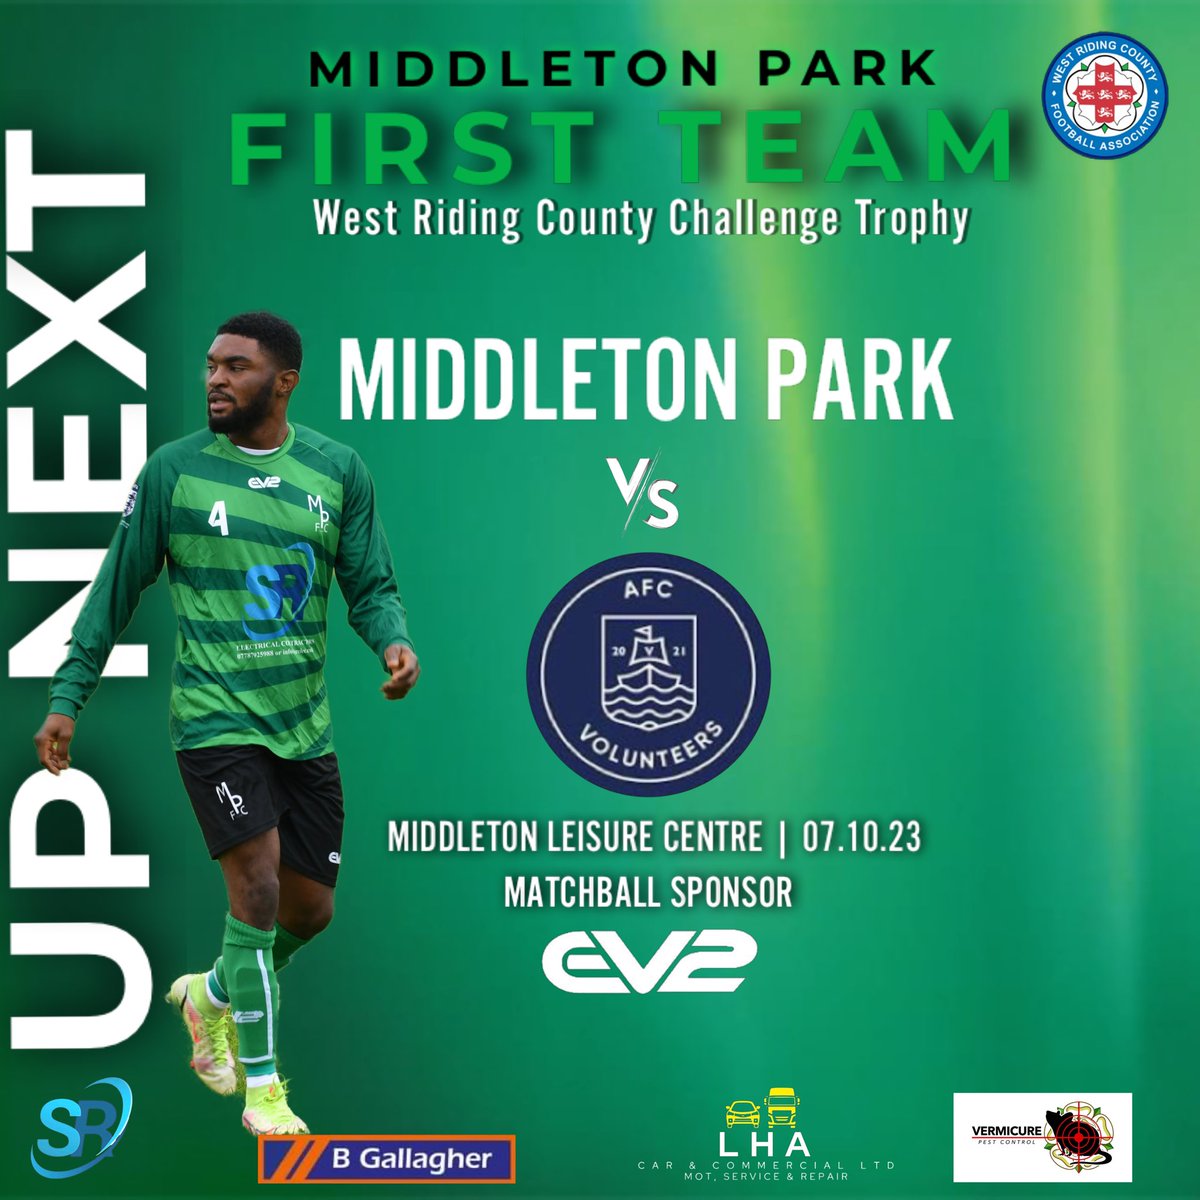 It’s county cup action for the first team this Saturday, we host Huddersfield & District League side @AfcVolunteers

🗓️| 07.10.23
🏆| County Challenge Trophy 
⌚️| kick-off: 14:00
📍| Middleton Leisure Centre, LS10 4AX